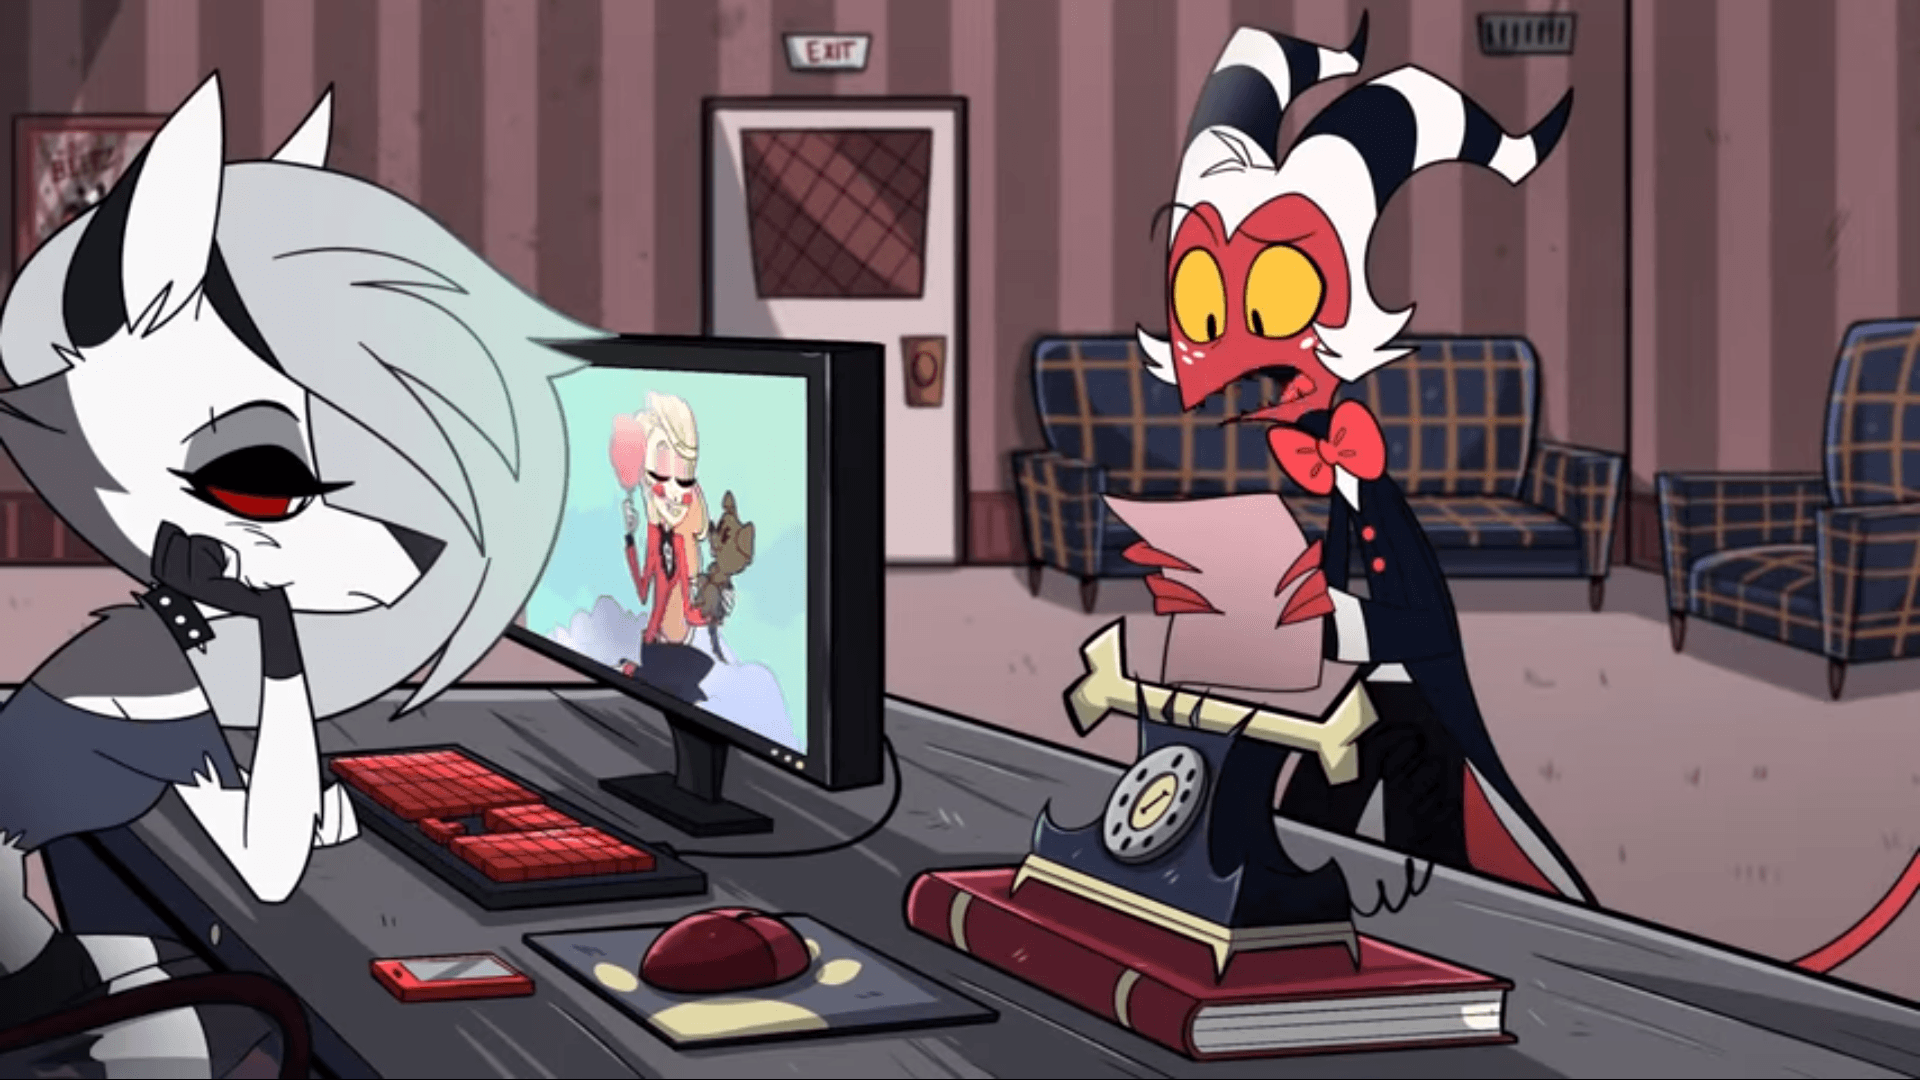 They put a Easter egg of helluva boss in hazbin hotel